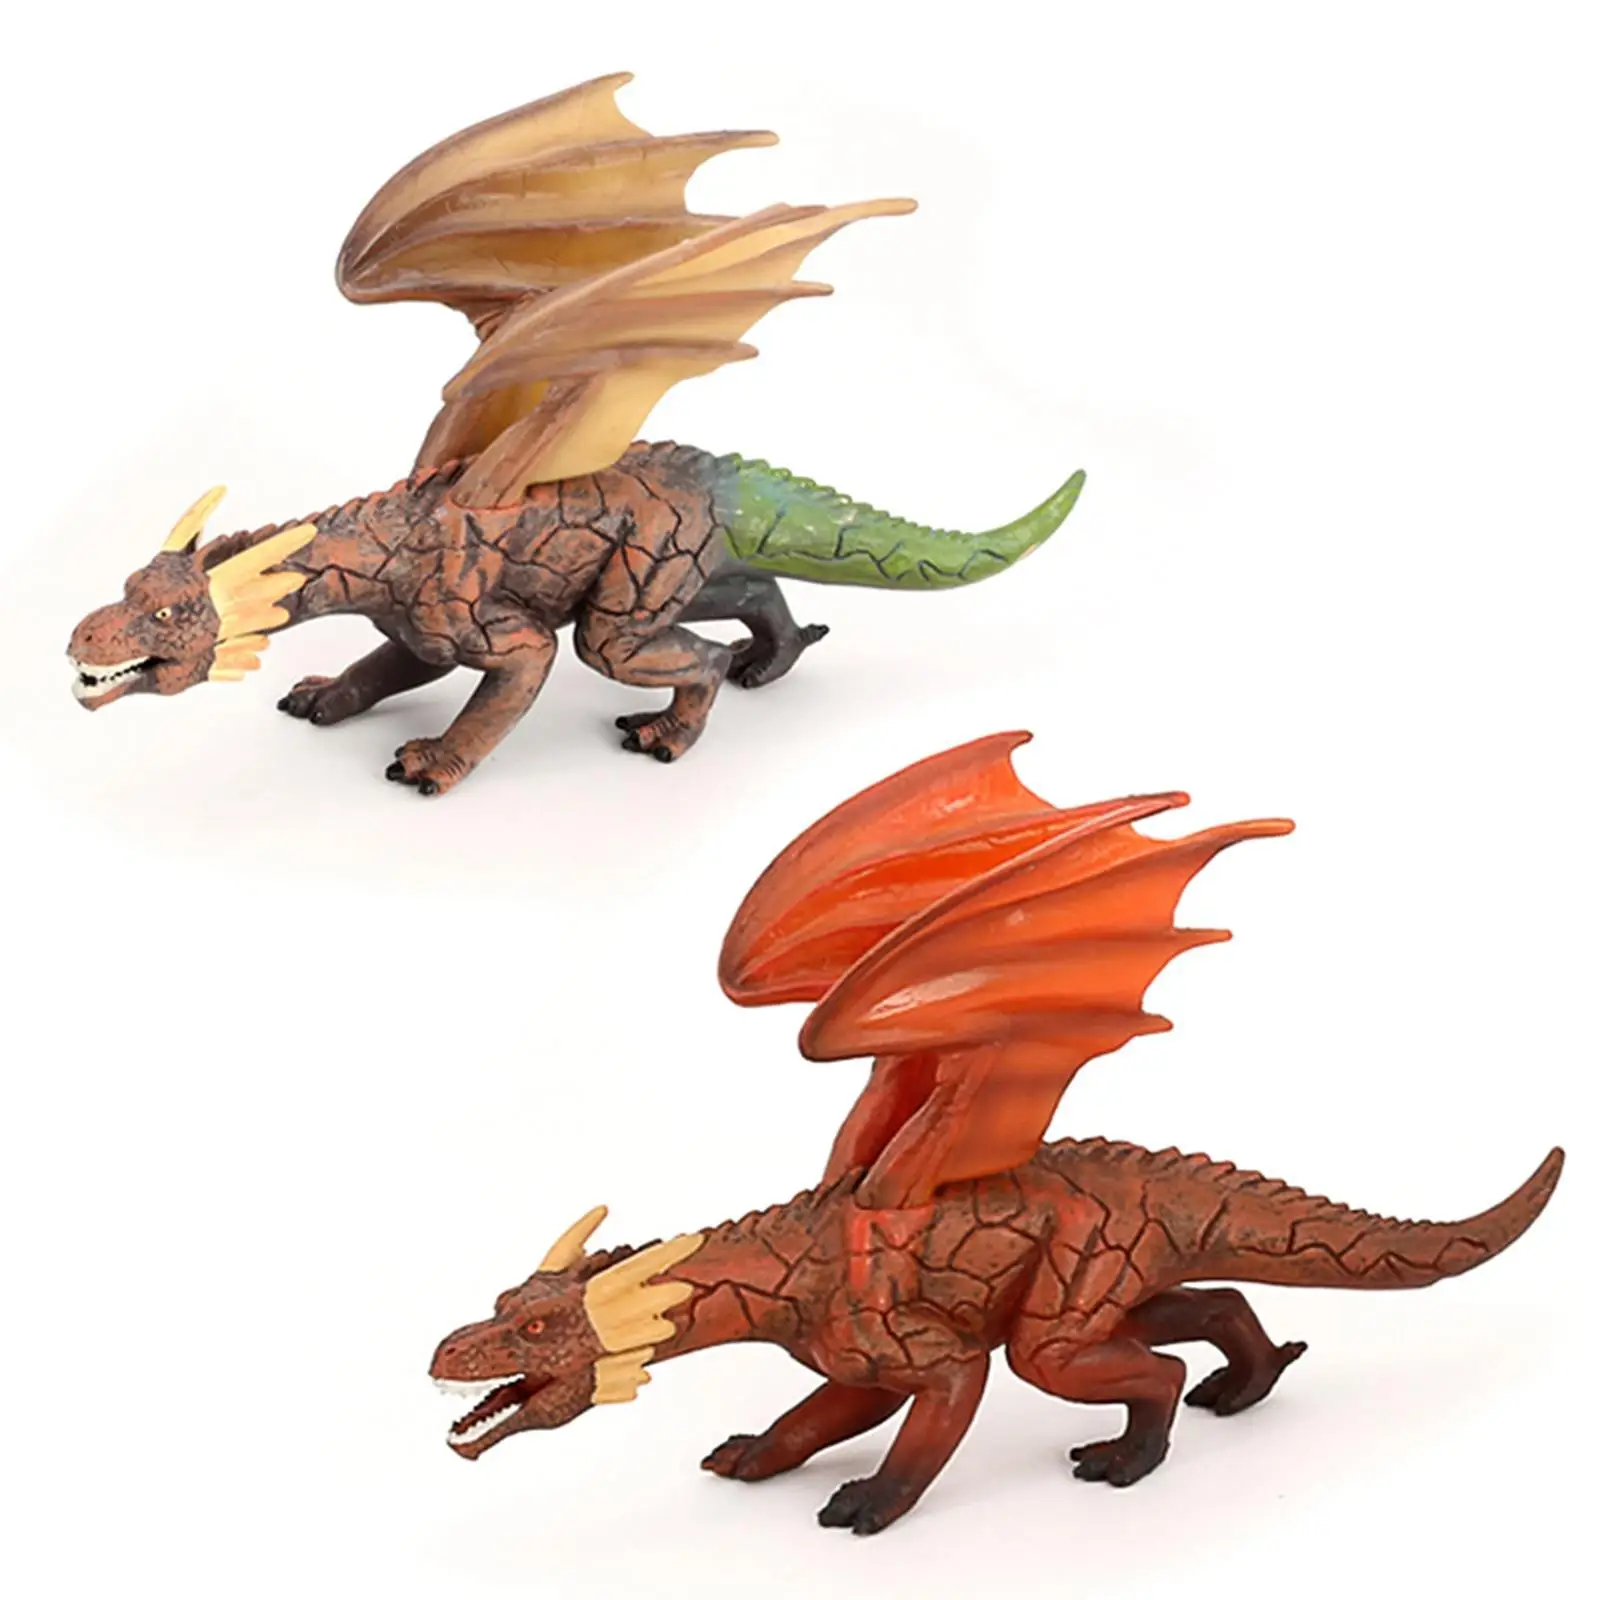 Simulated Dinosaur Figure Kids Educational Toys for Teens Adults Xmas Gifts